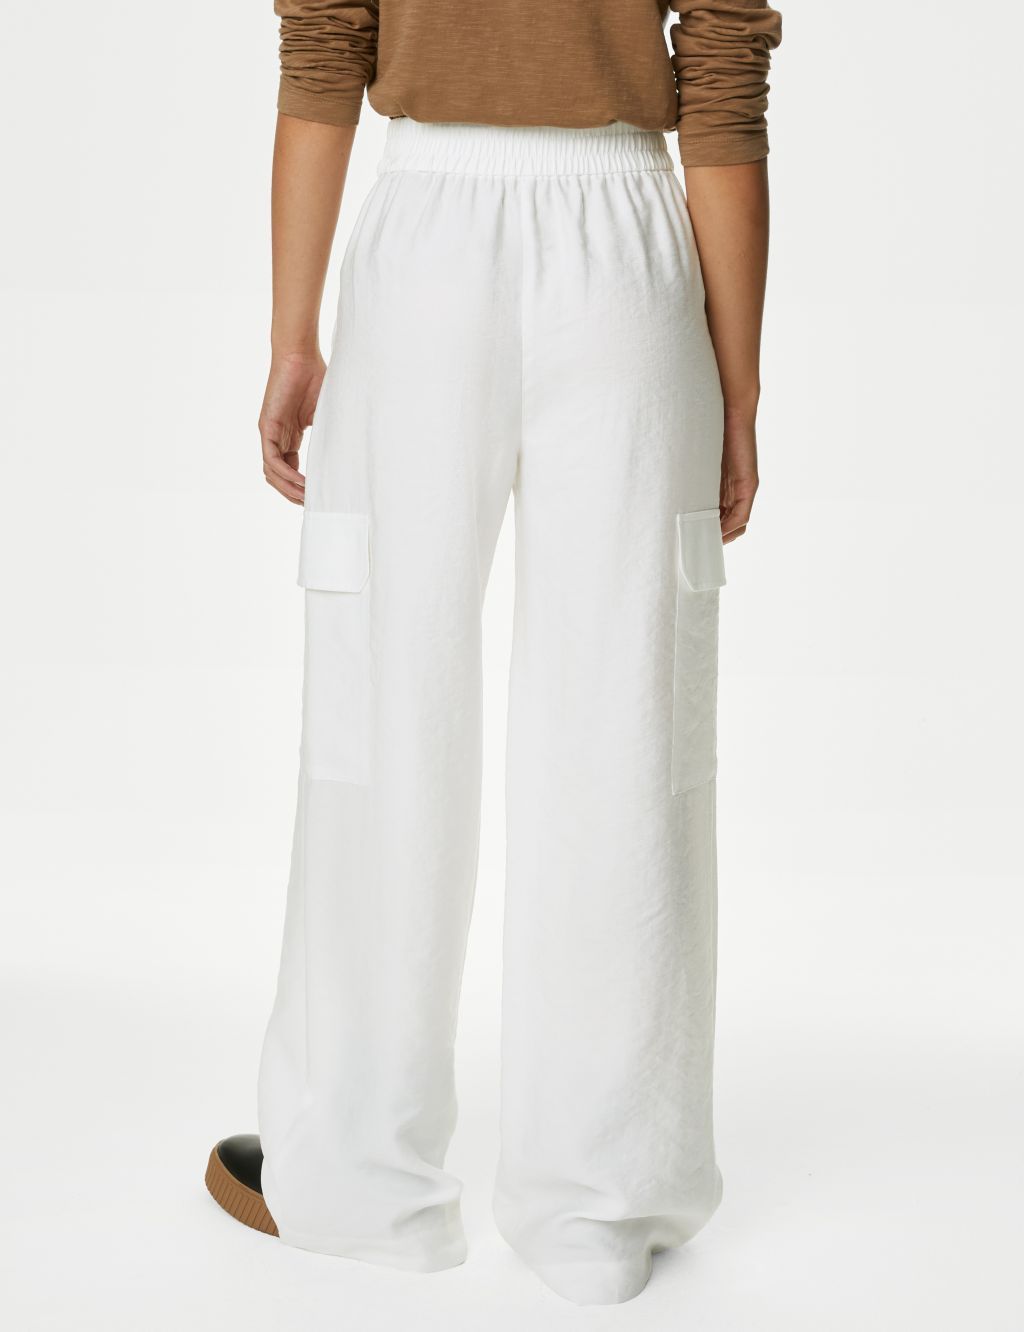 Utility Wide Leg Trousers image 5